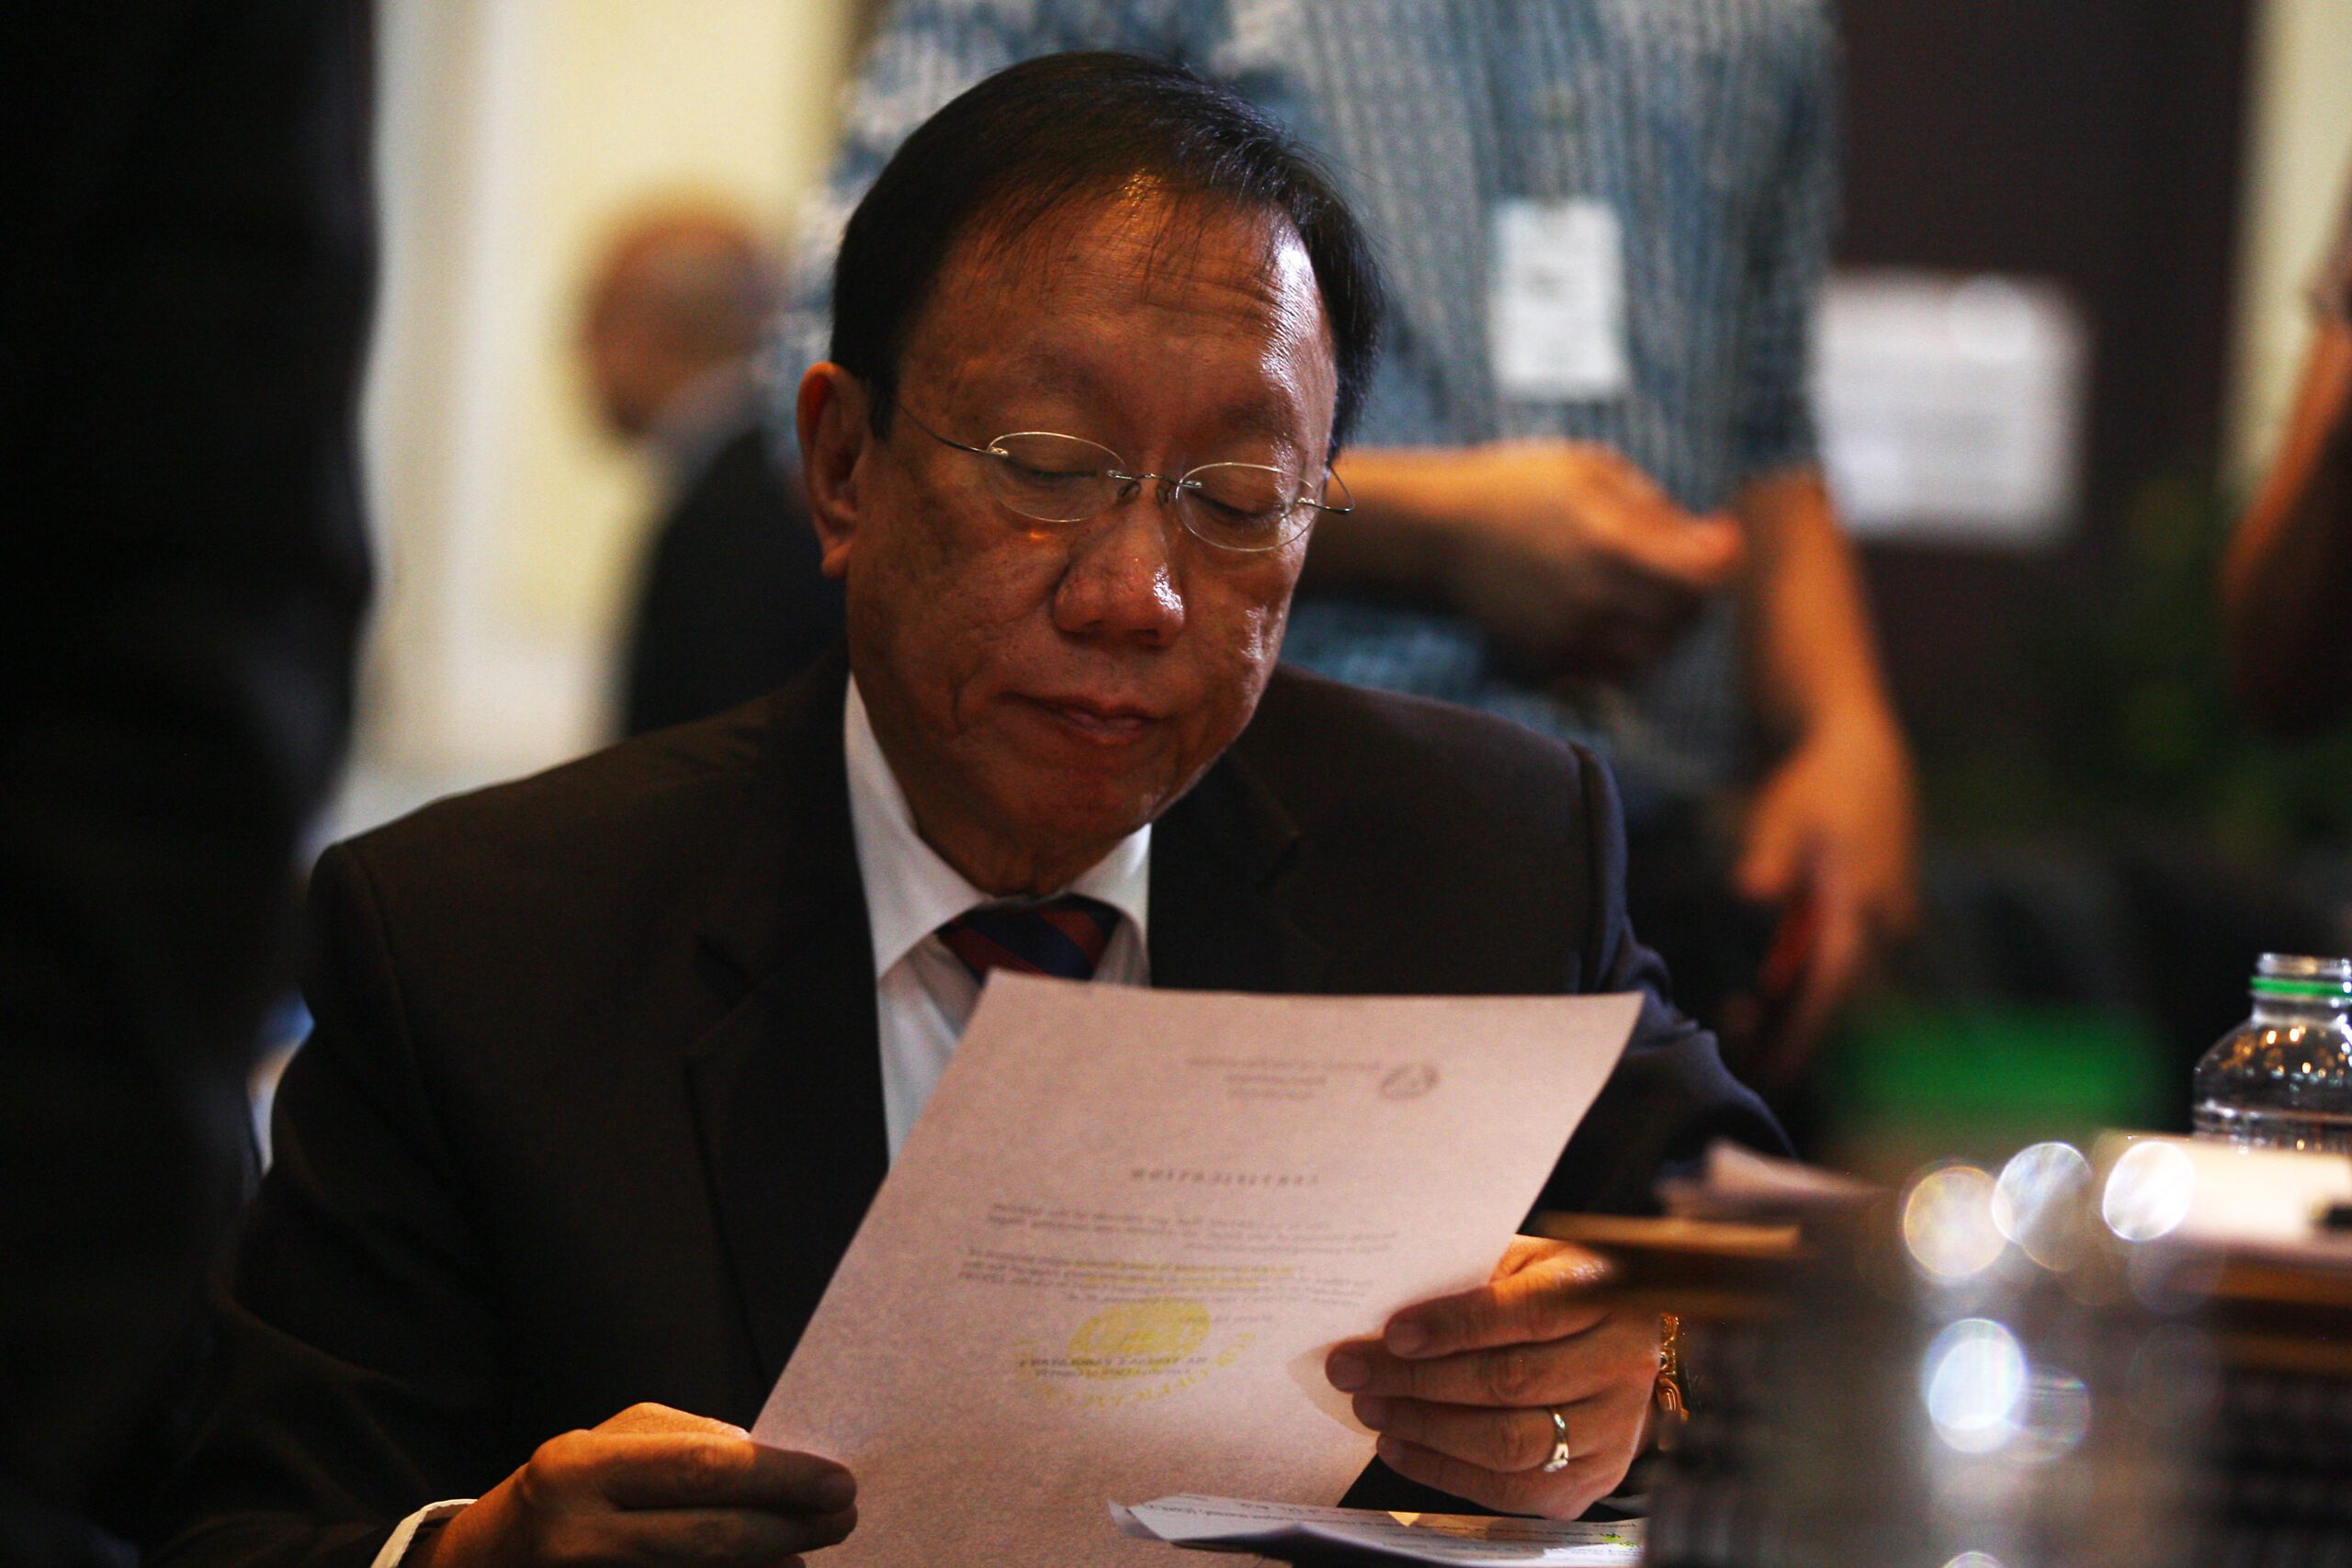 Calida received P7M in excess allowances in 2017 – COA